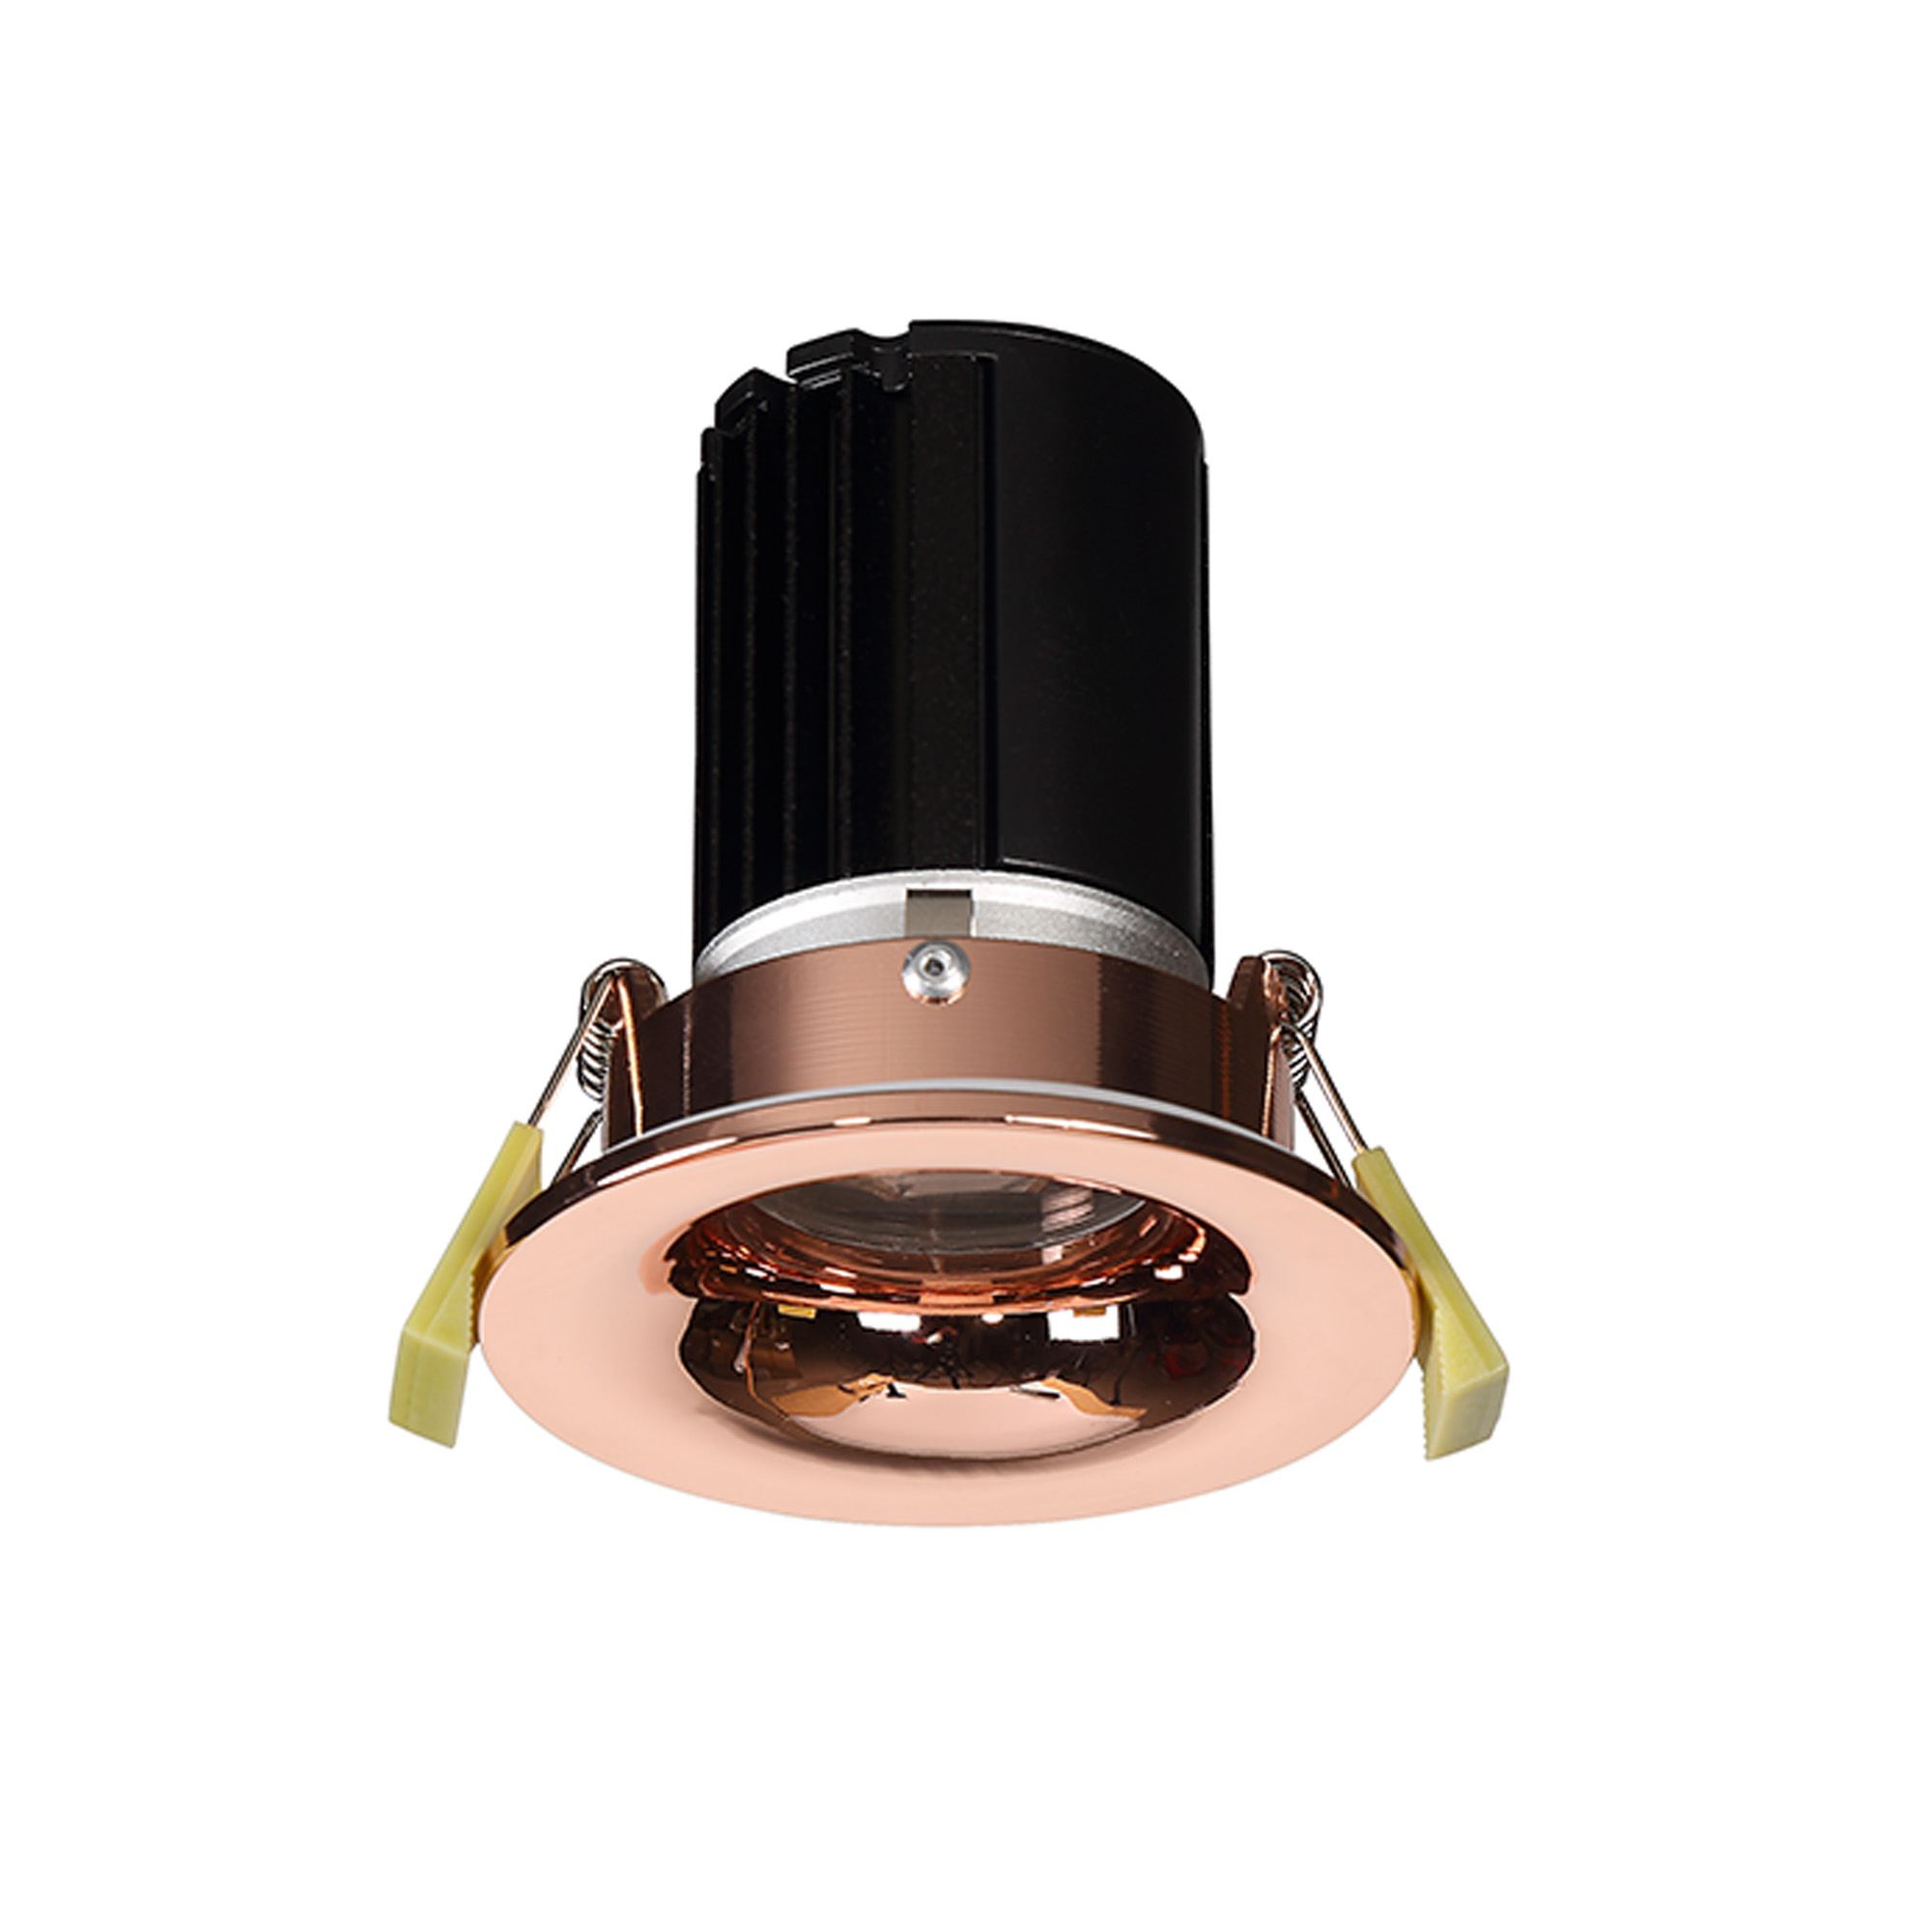 DM201492  Bruve 9 Tridonic powered 9W 2700K 700lm 24° LED Engine,250mA , CRI>90 LED Engine Rose Gold Fixed Round Recessed Downlight, Inner Glass cover, IP65